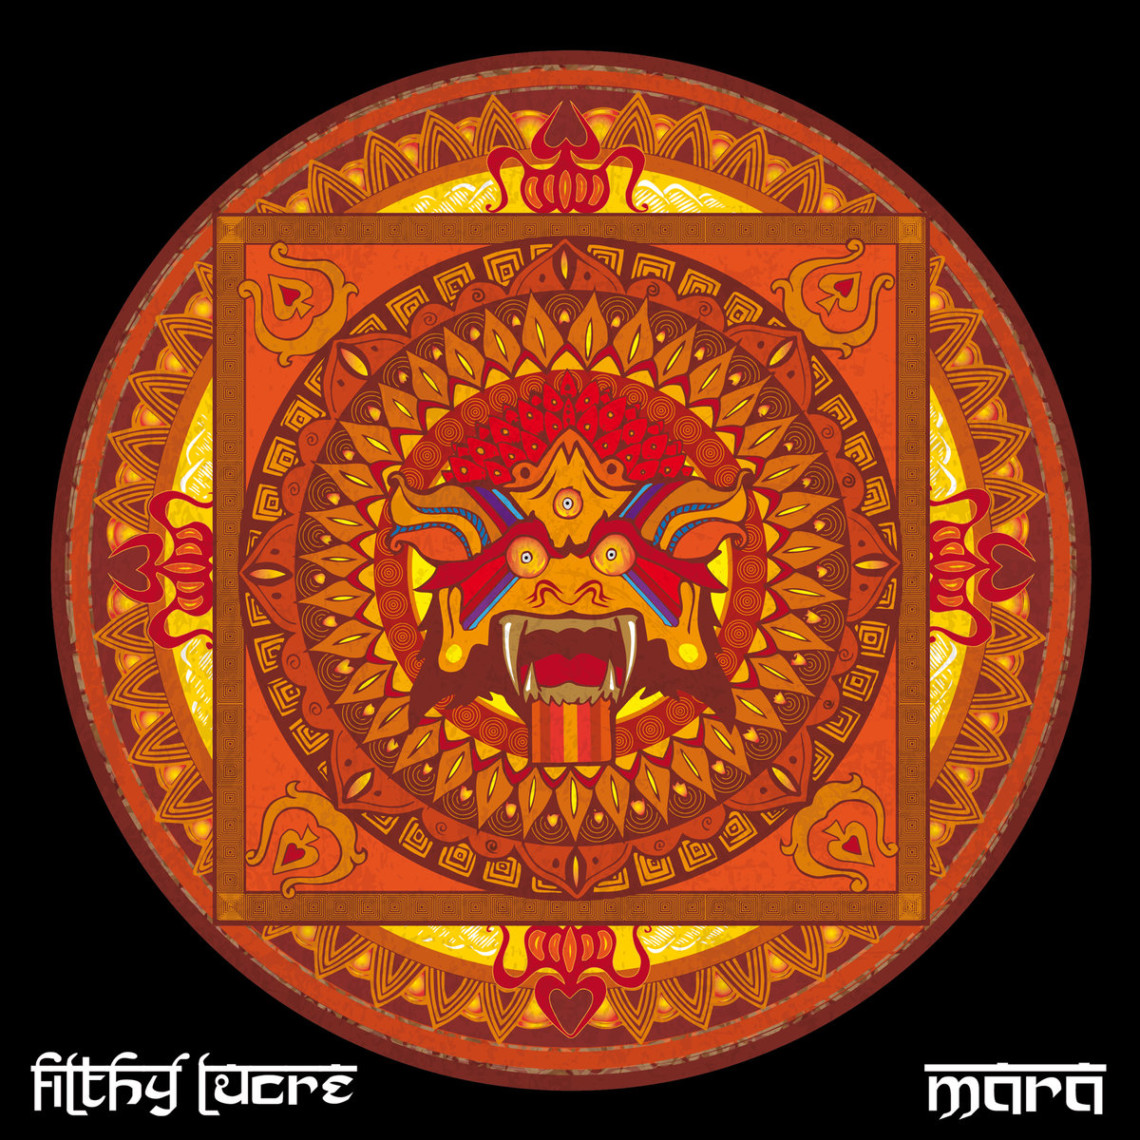 Filthy Lucre – Mara Review